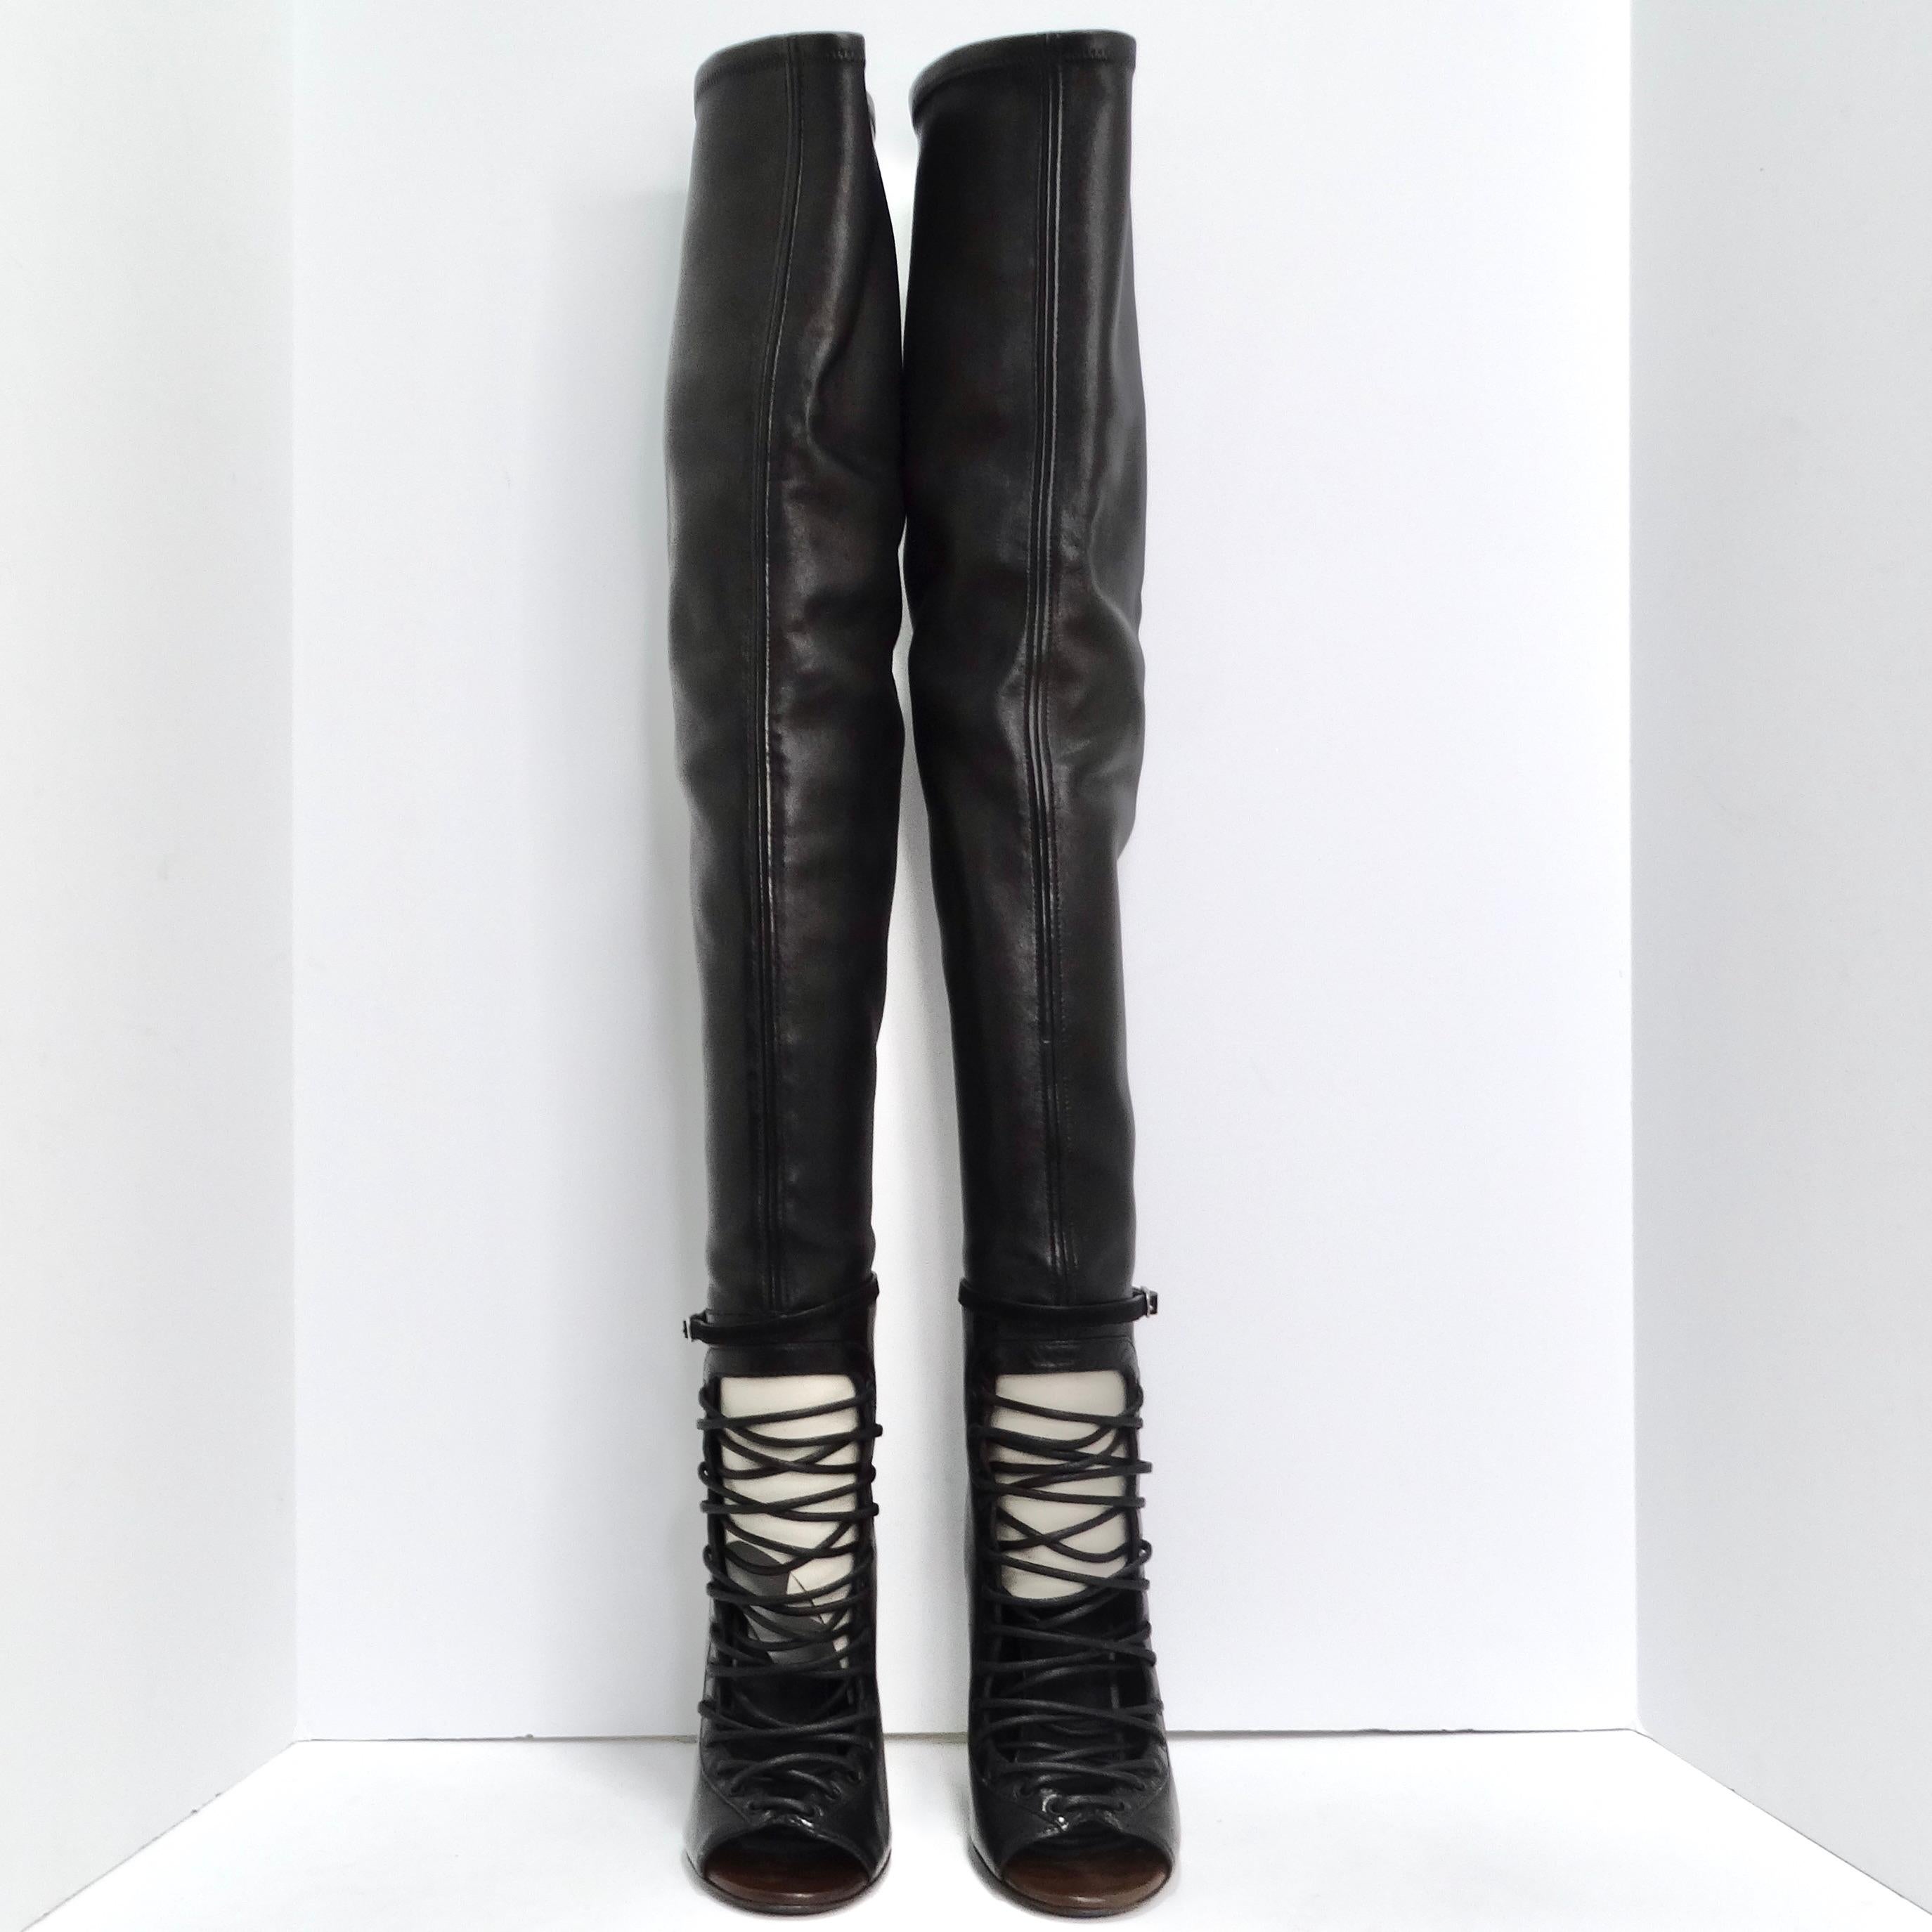 Givenchy Nunka Leather Thigh High Boots Black In Excellent Condition For Sale In Scottsdale, AZ